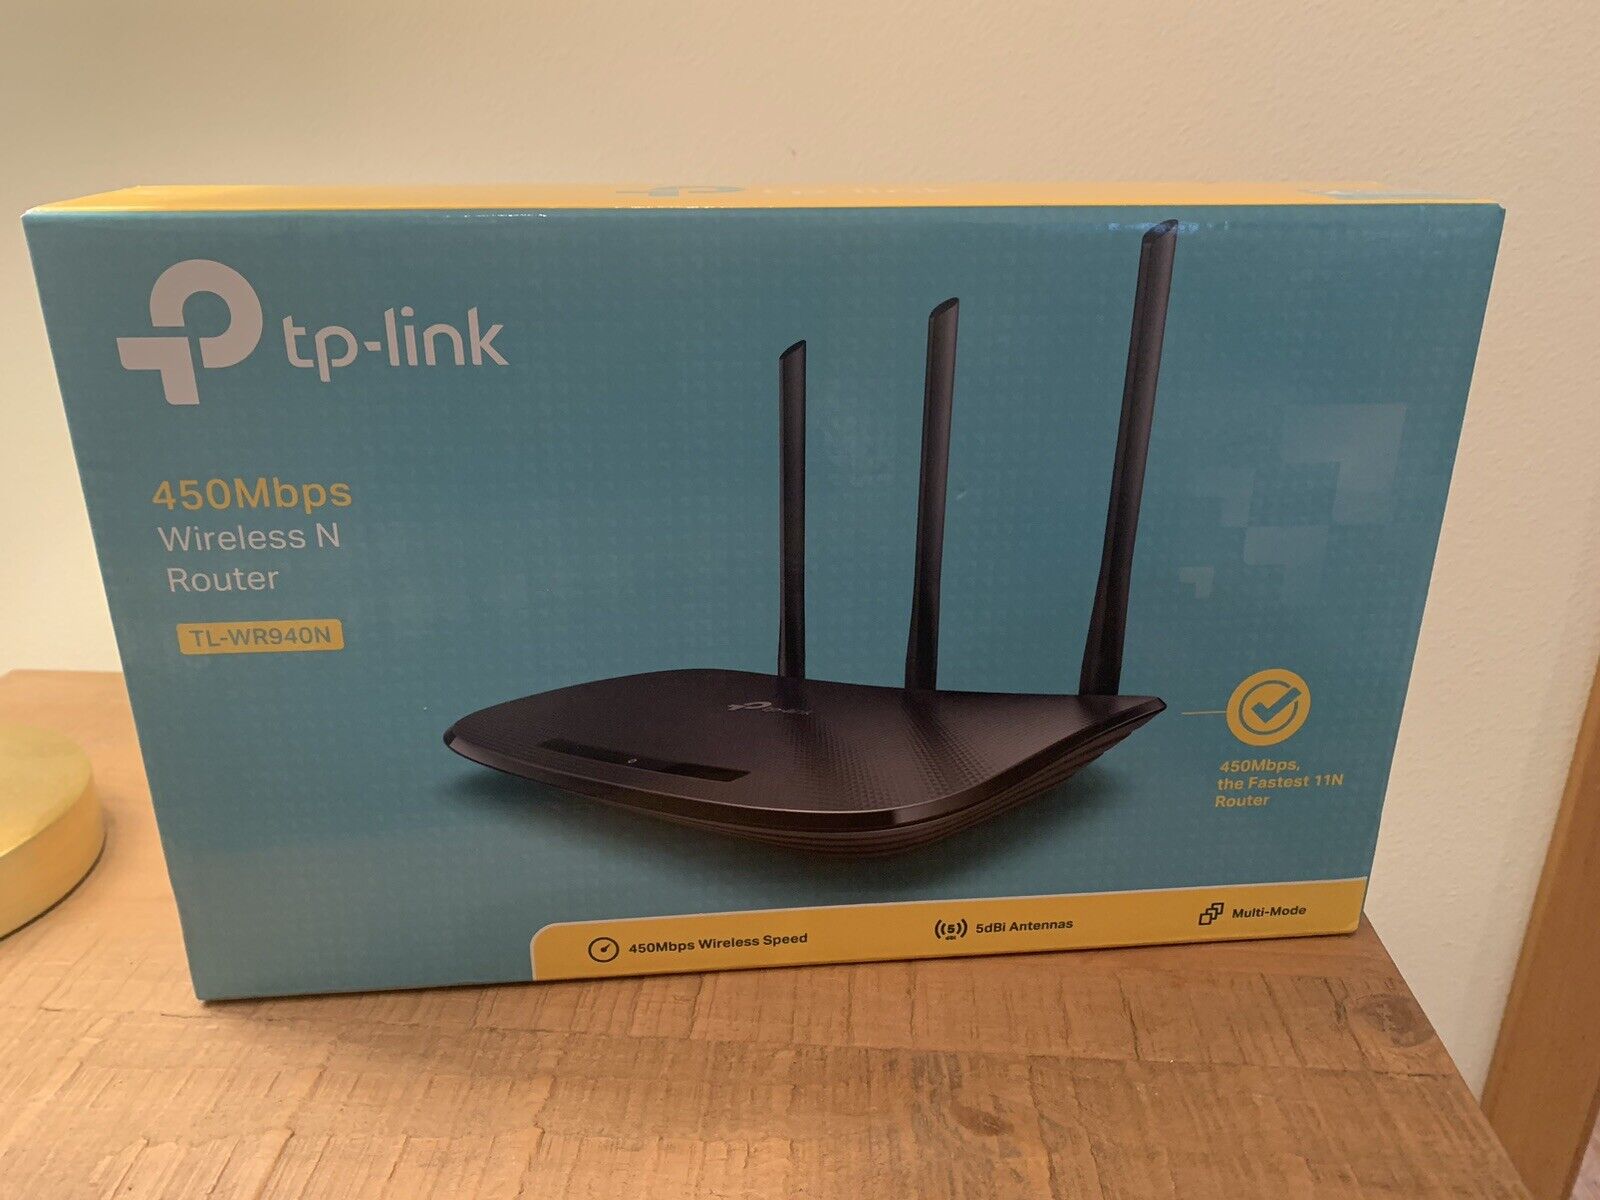 TP-Link 450Mbps Wireless N Router - TL-WR940N